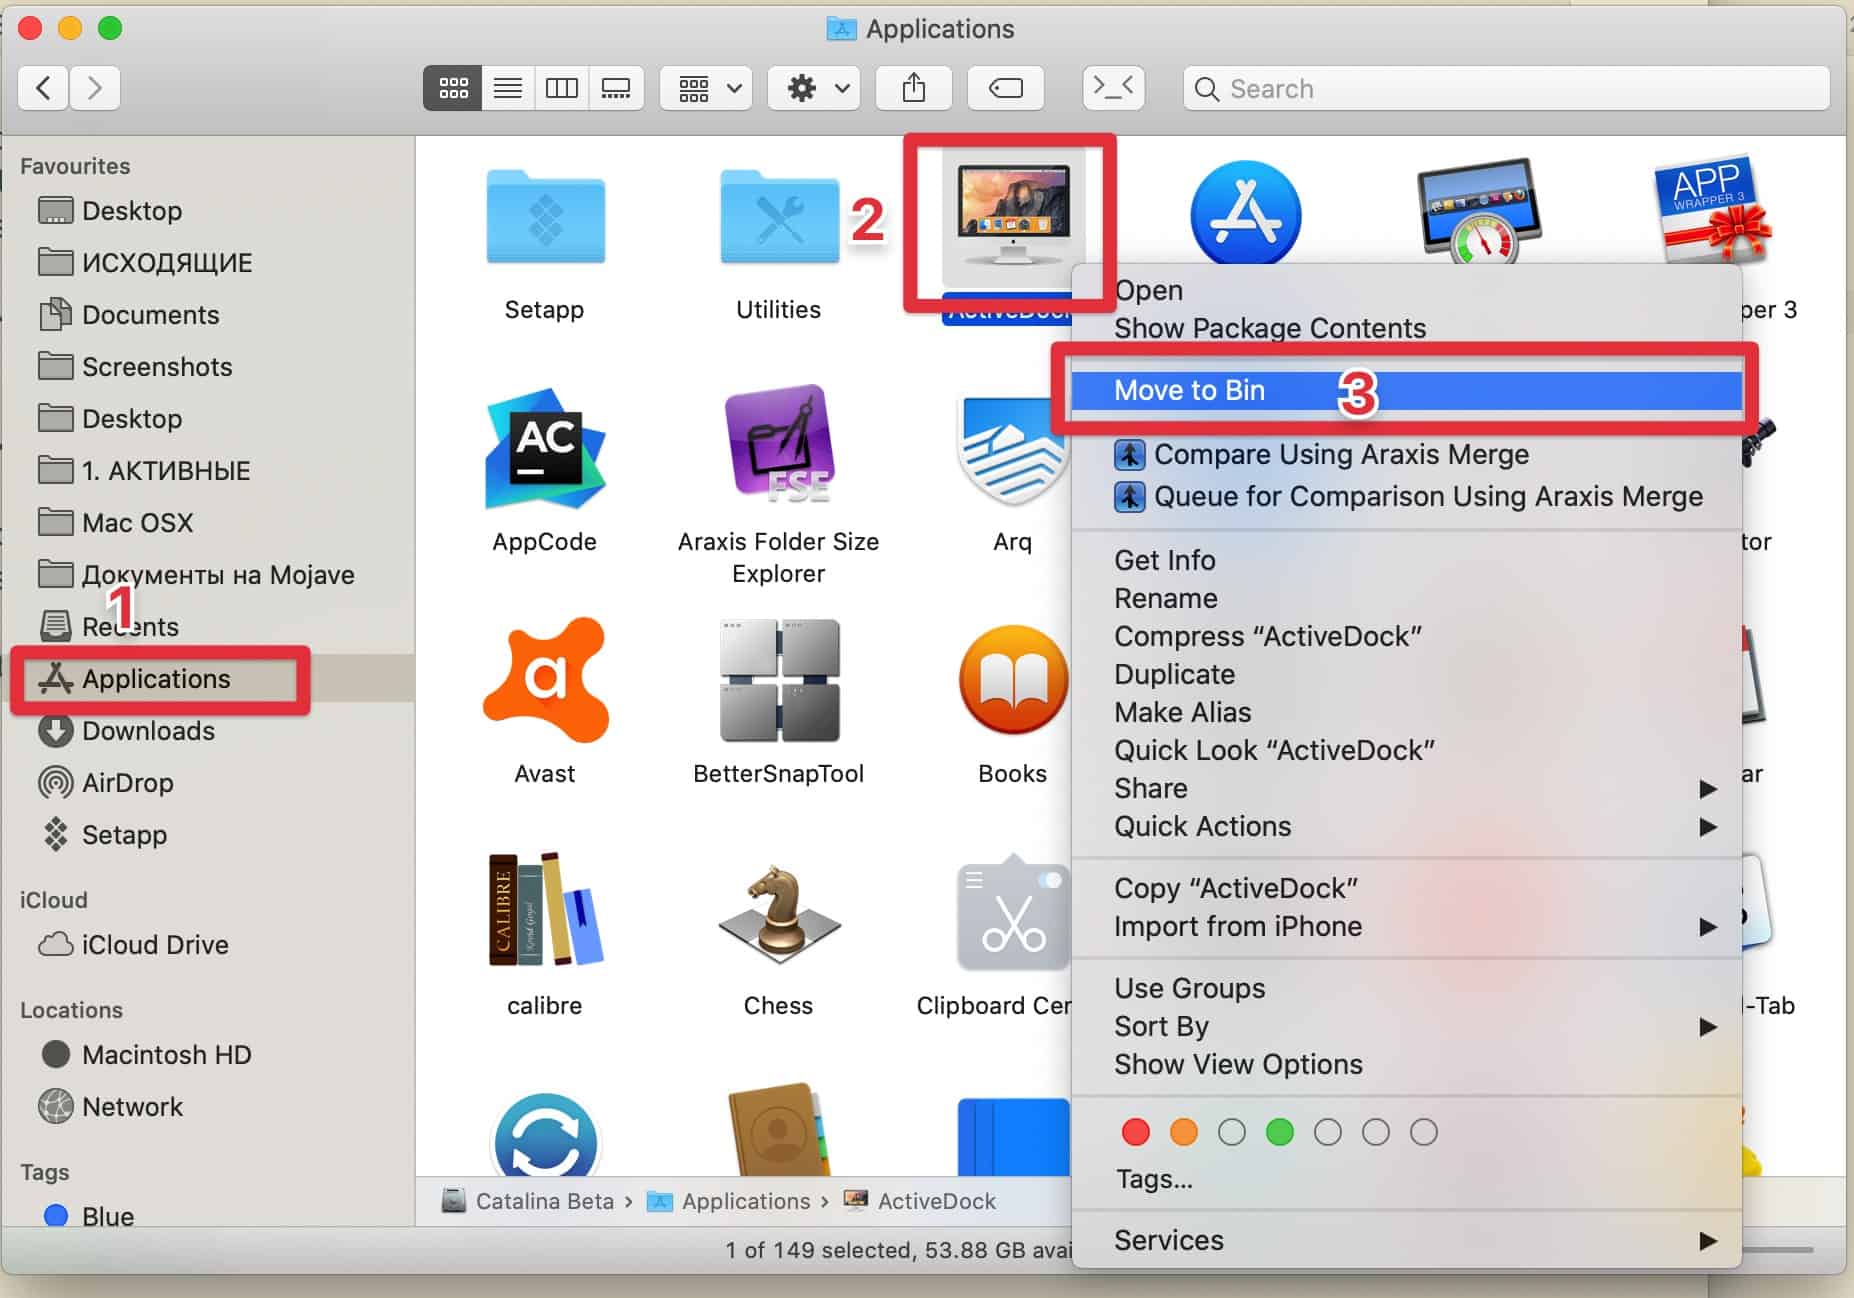 Ow To Uninstall Apps On Mac